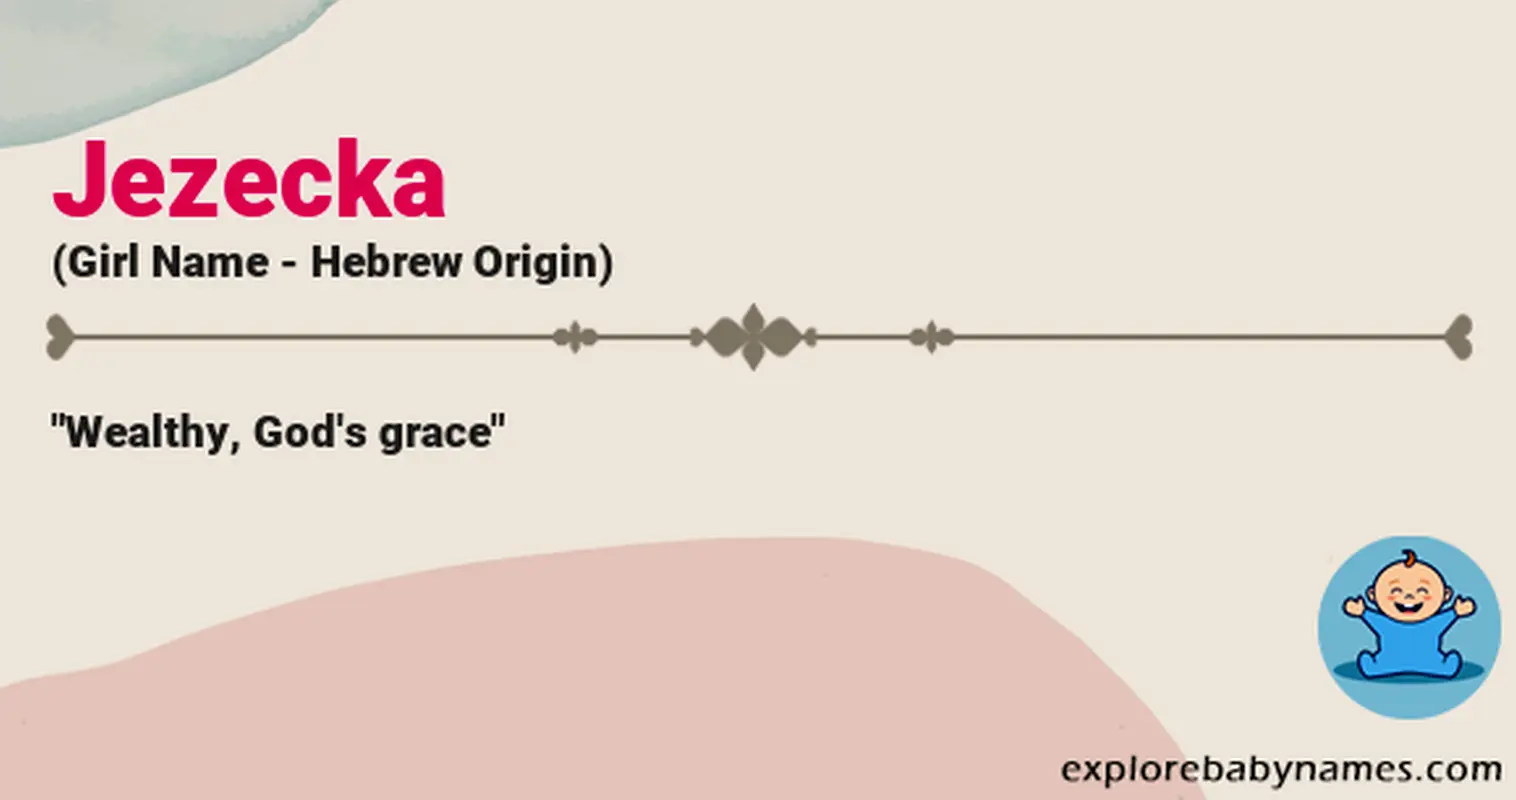 Meaning of Jezecka